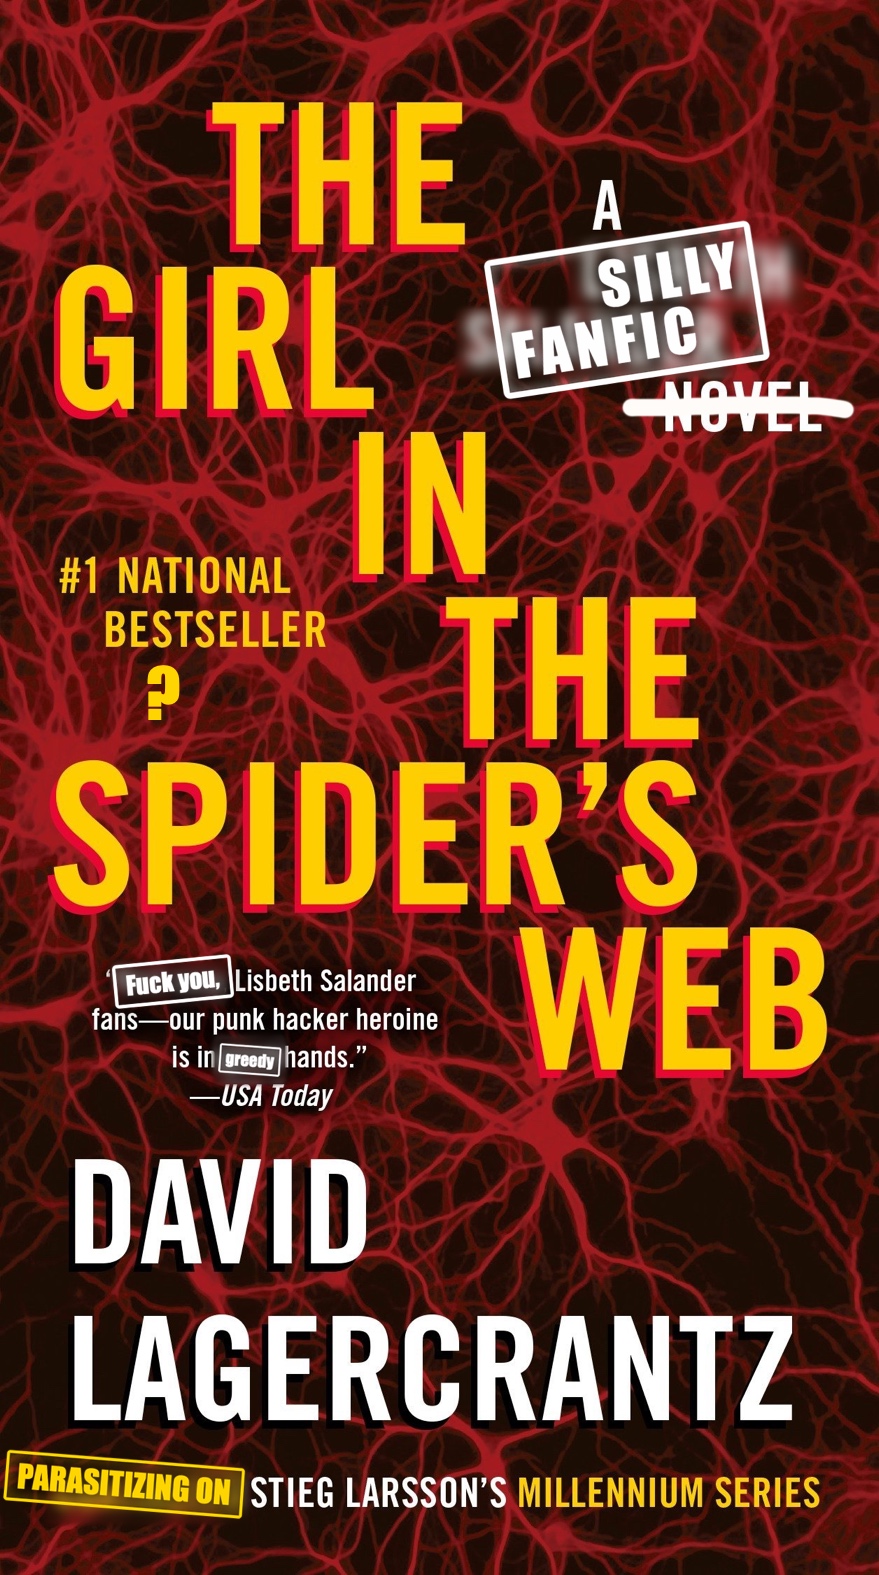 The Girl in the Spider's Web book cover